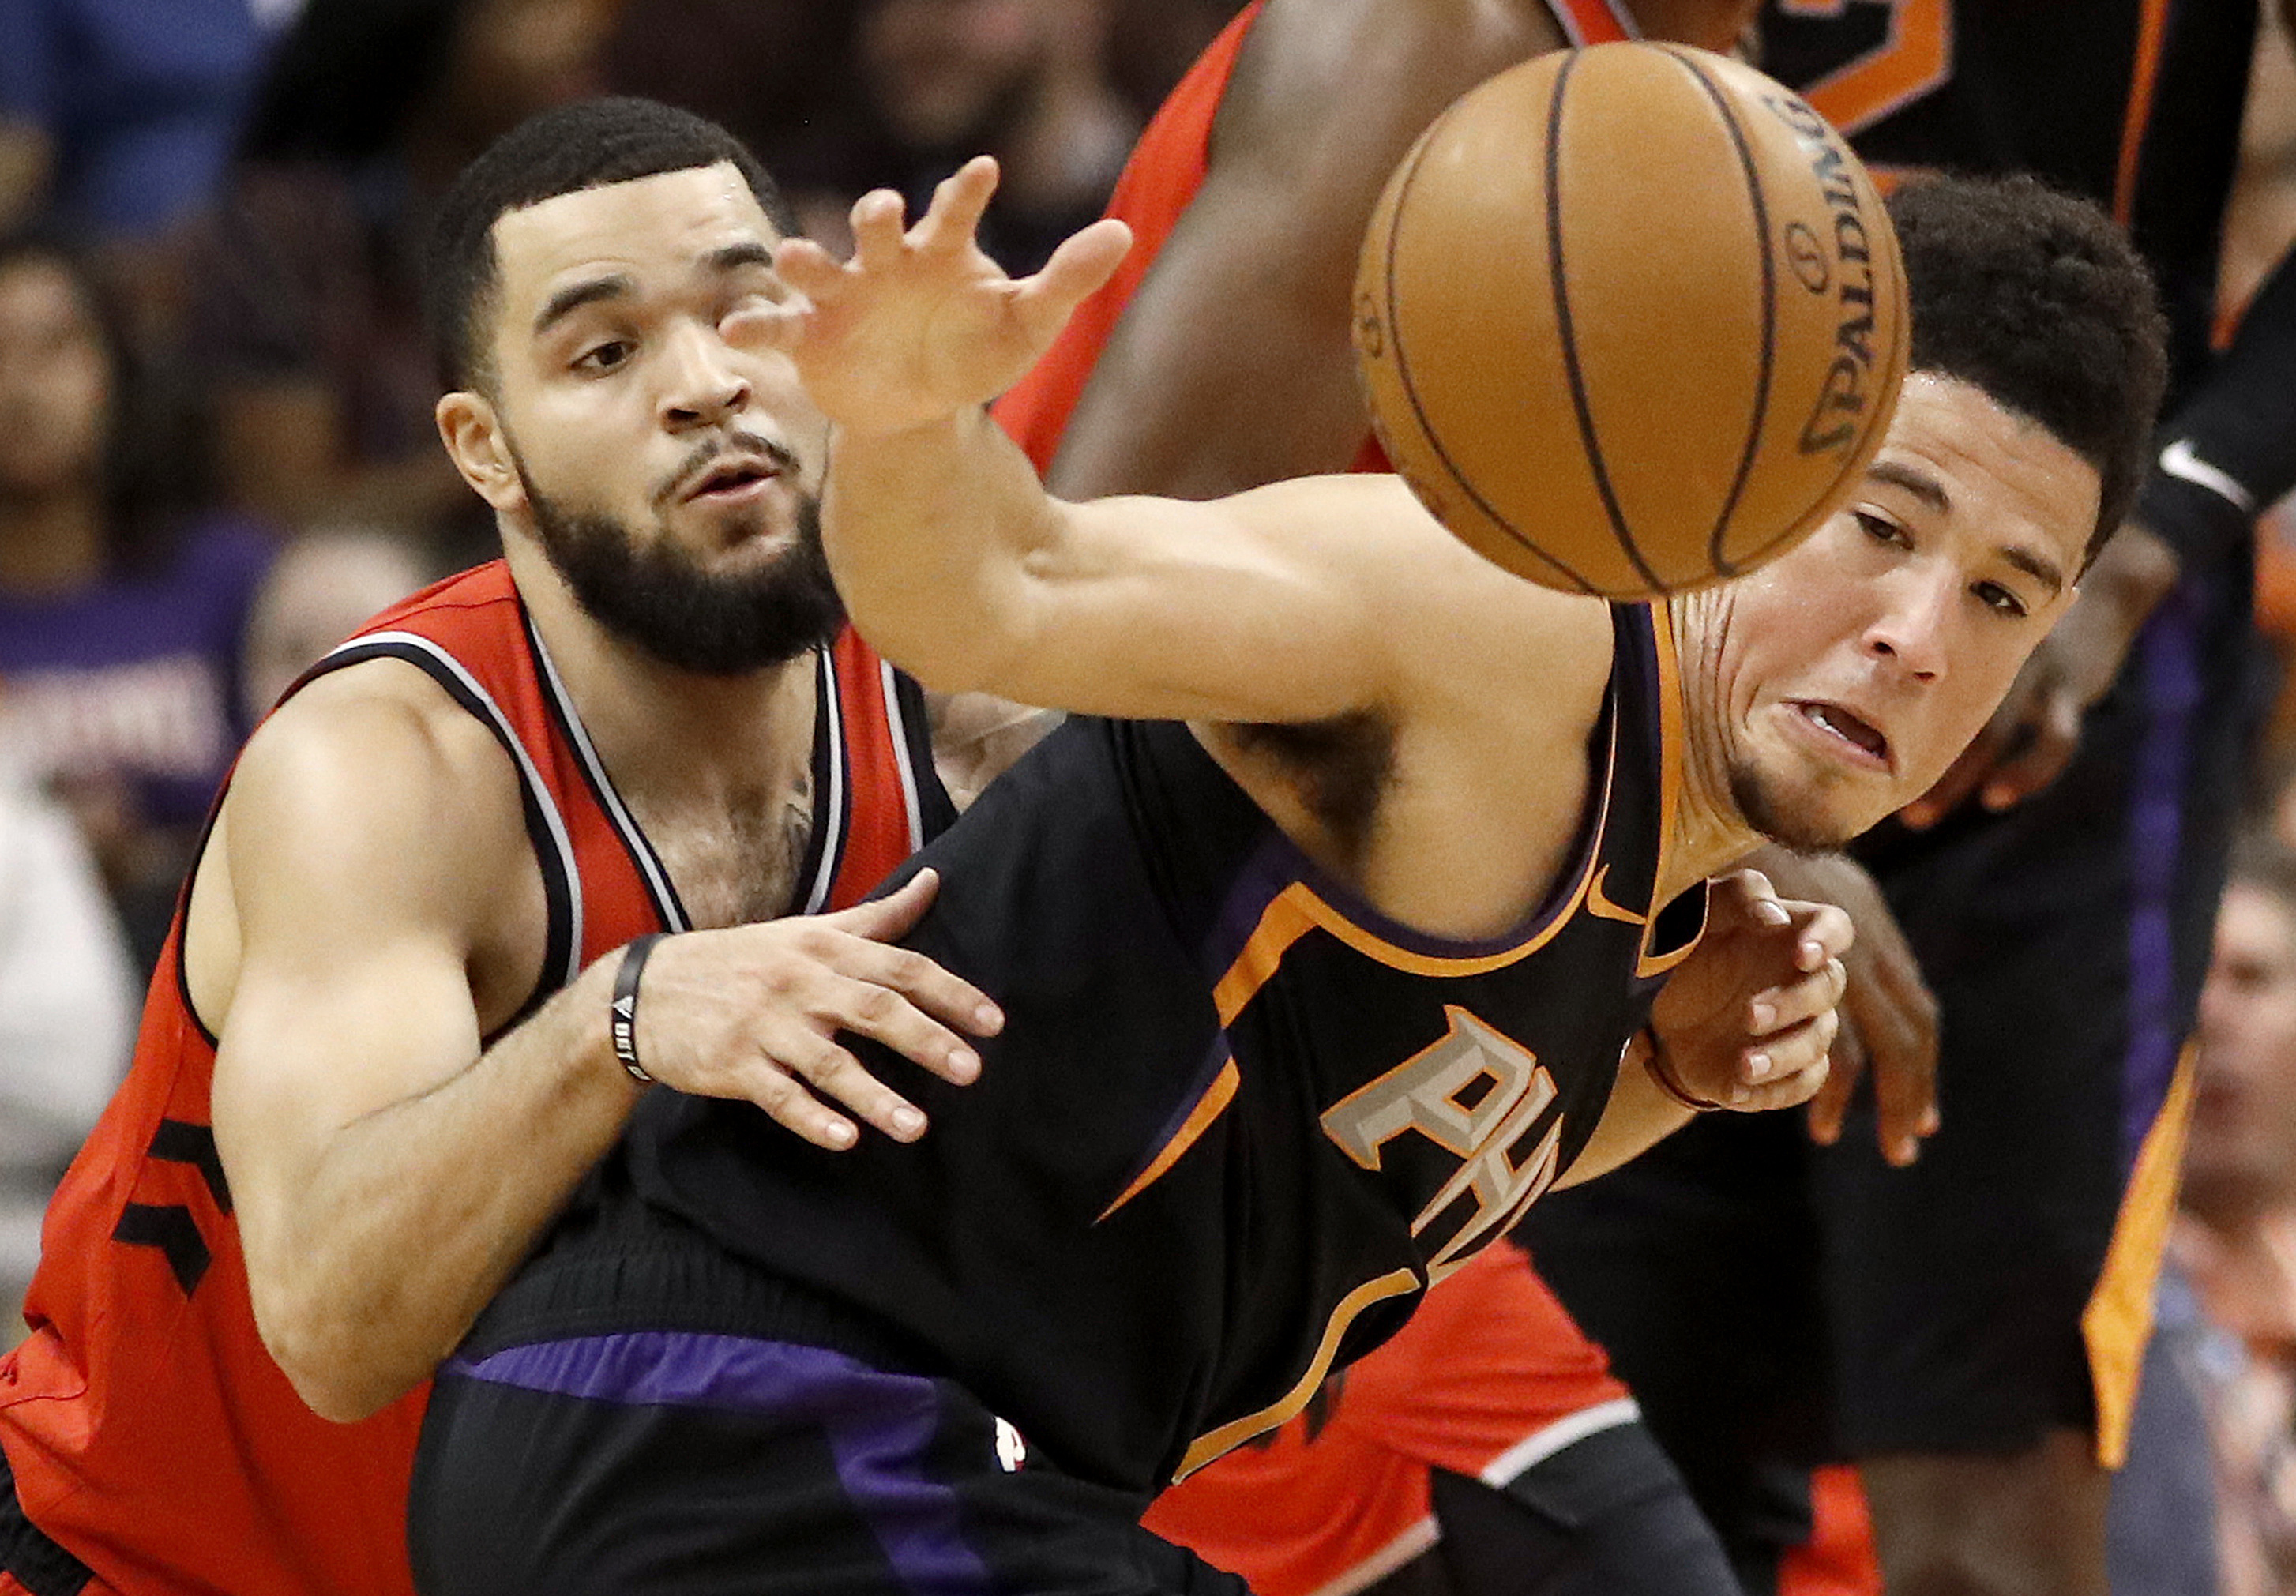 Raptors finally pull away from Suns 107-98, improve to 8-1